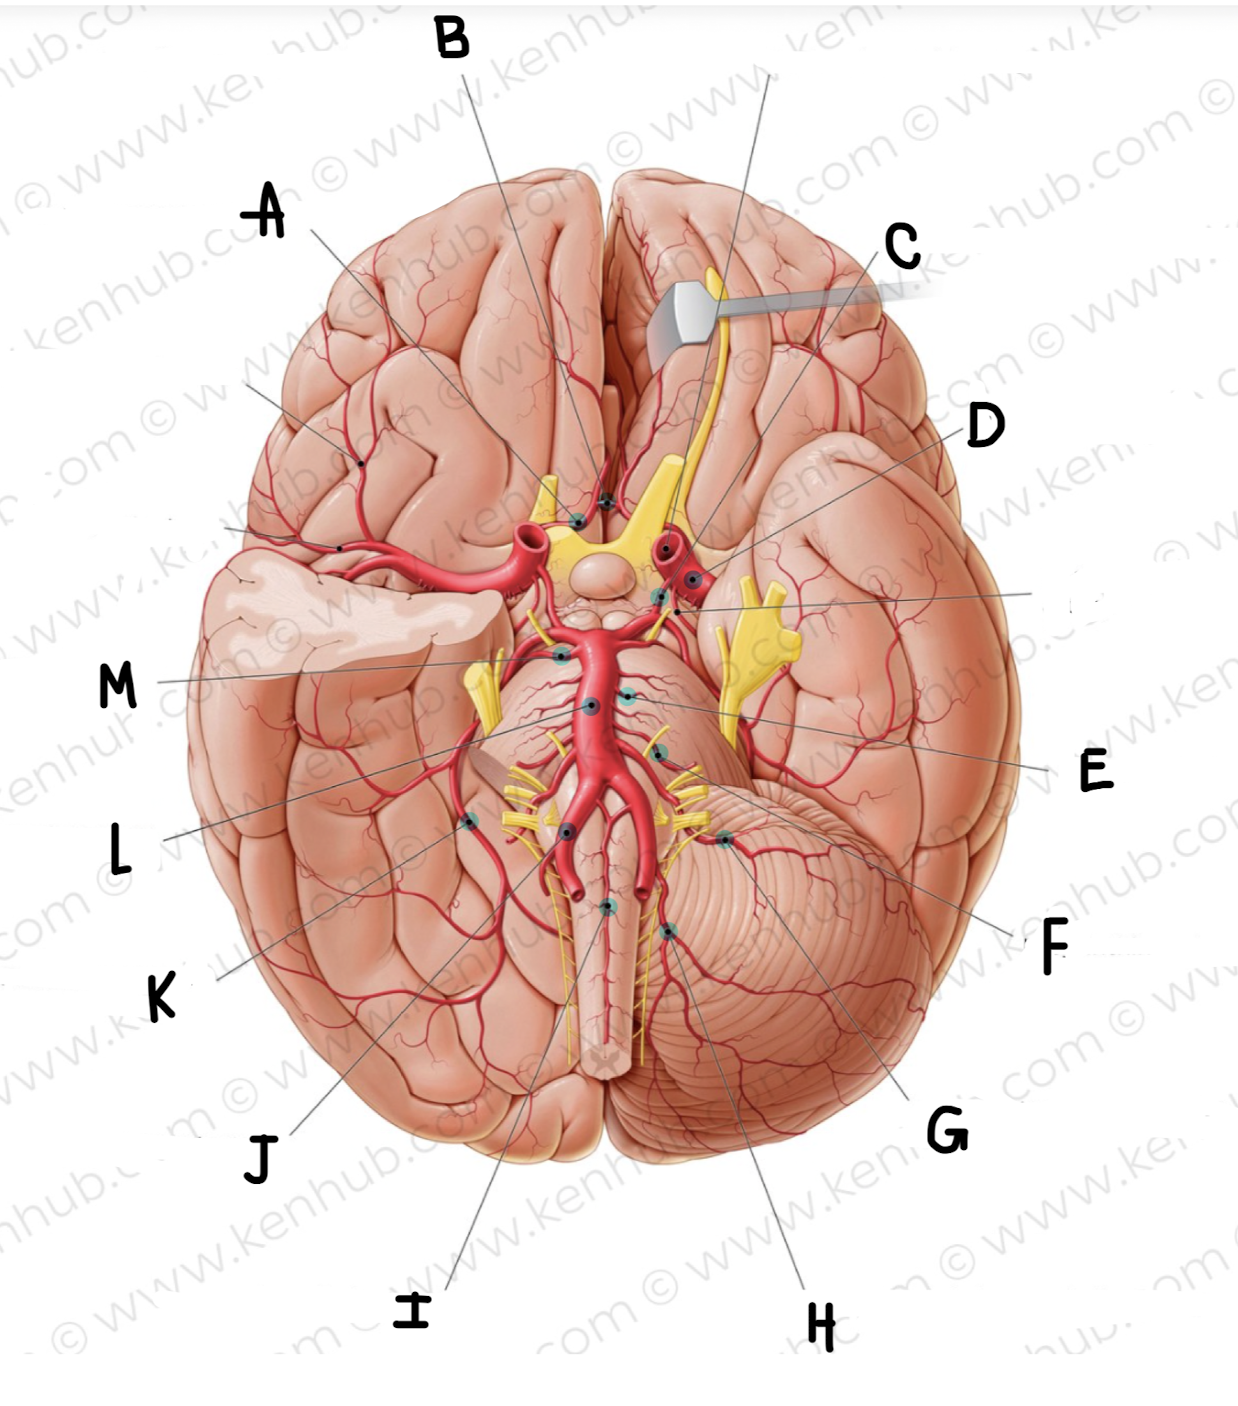 <p>What is the name of the artery labeled M?</p>